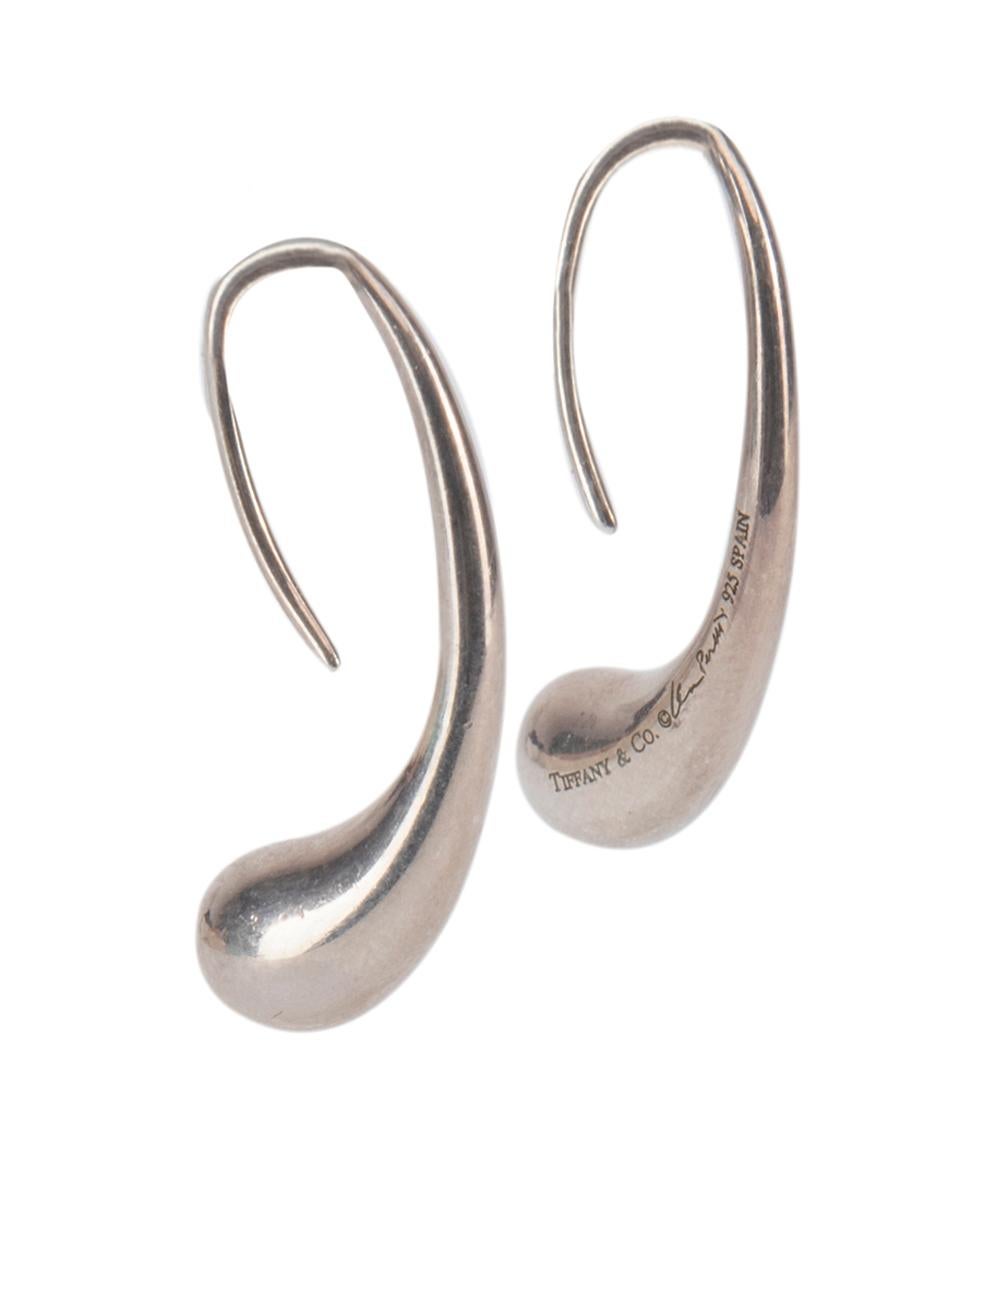 CONDITION is Very good. Hardly any wear to earrings is evident. Very Minimal scuffs seen on this used Tiiffany & Co. designer resale item. Details Sliver Sterling sliver Tear drop shape Slip on fastening Made in Spain Composition EXTERIOR: Sterling